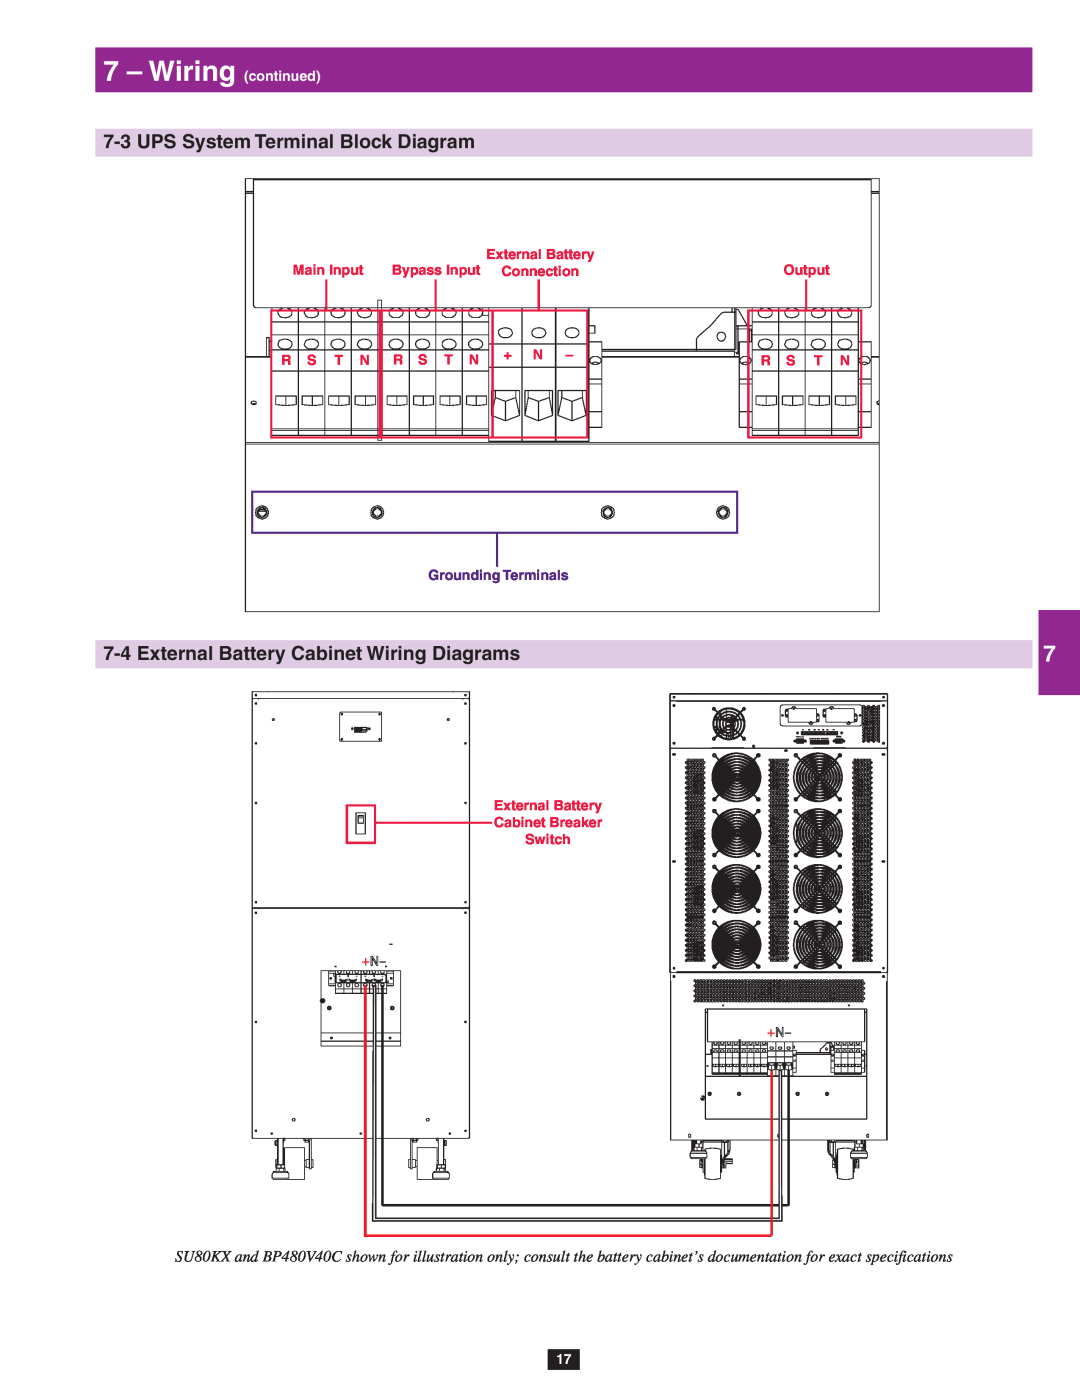 Tripp Lite SU40KX Wiring continued, UPS System Terminal Block Diagram, External Battery Cabinet Wiring Diagrams, Output 